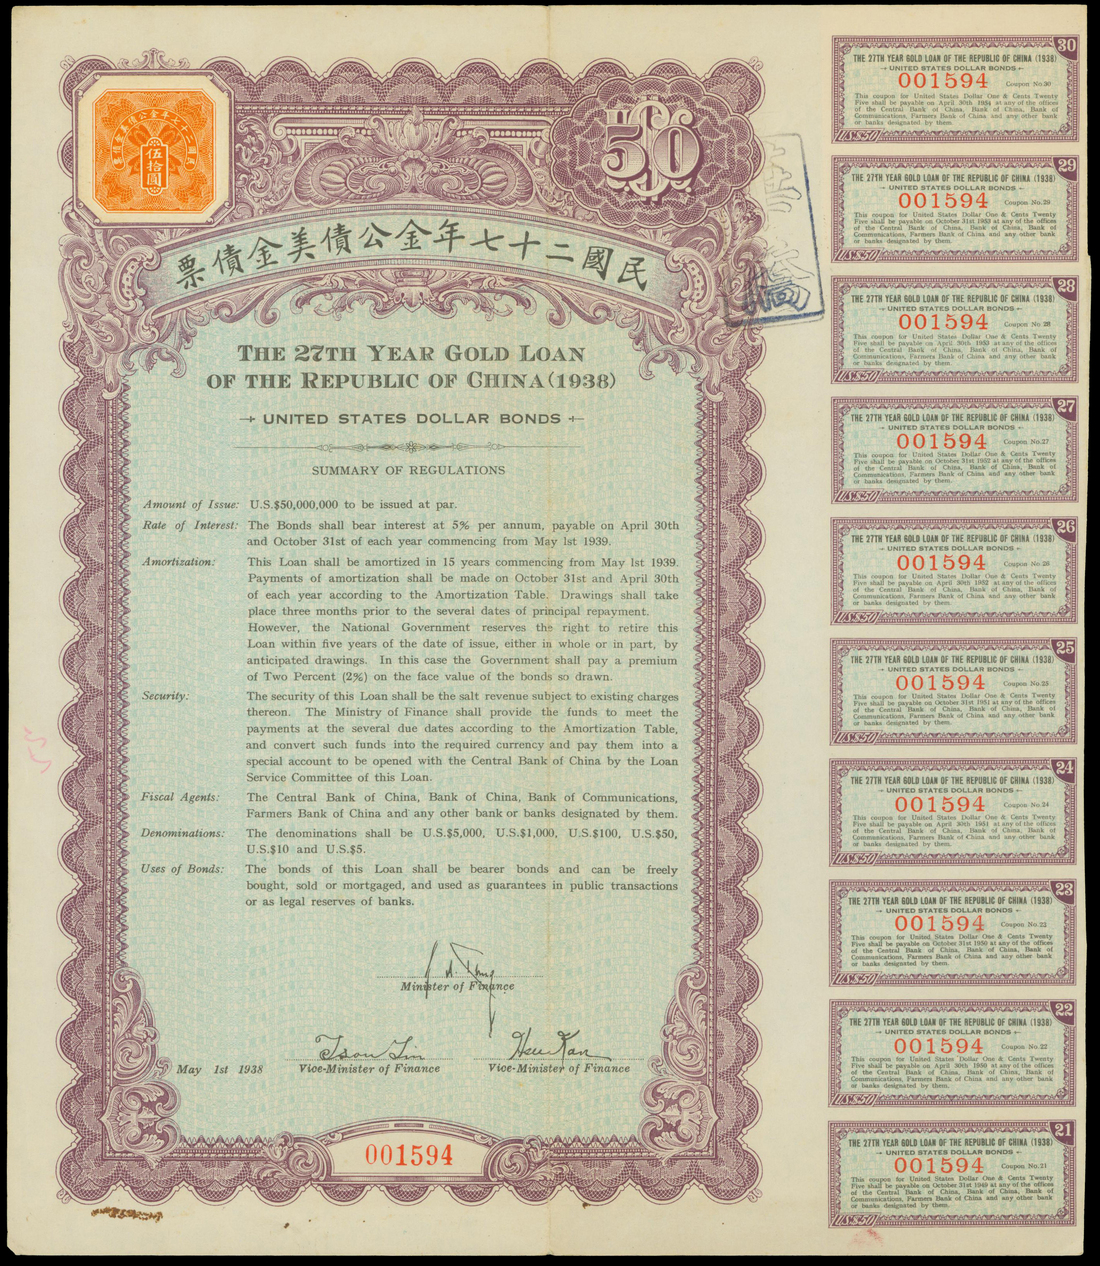 1938 (27th Year) 5% Gold Loan of the Republic of China, bond for $50, no. 001594, purple on light